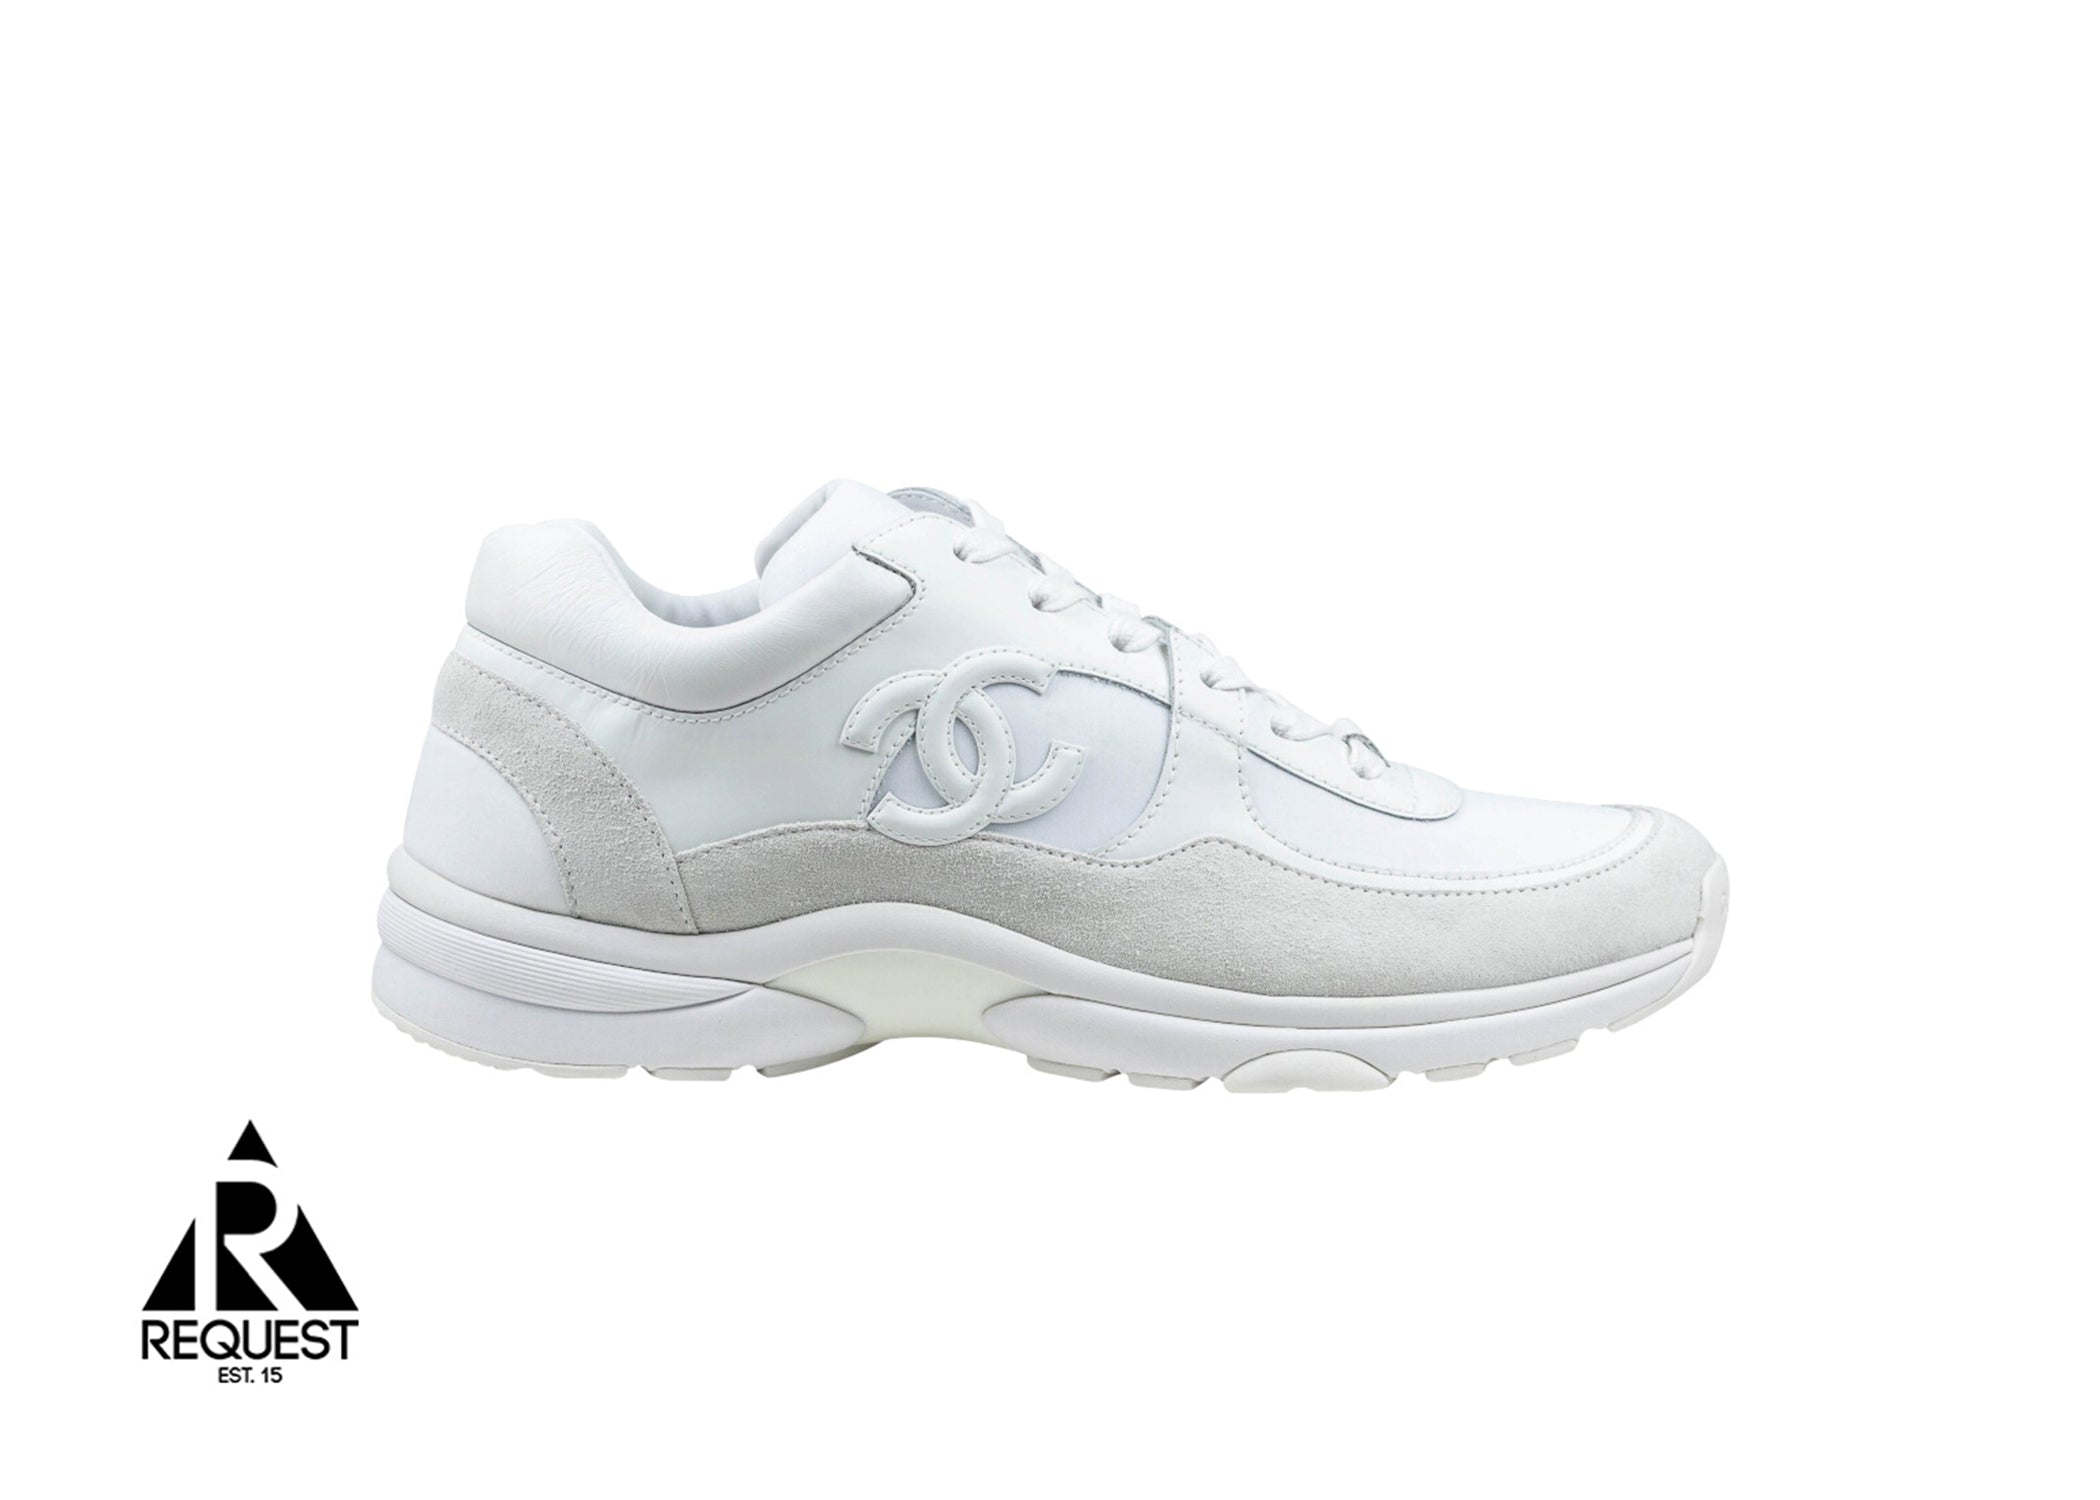 CHANEL, Shoes, Authentic Chanel Sport Trainers In White